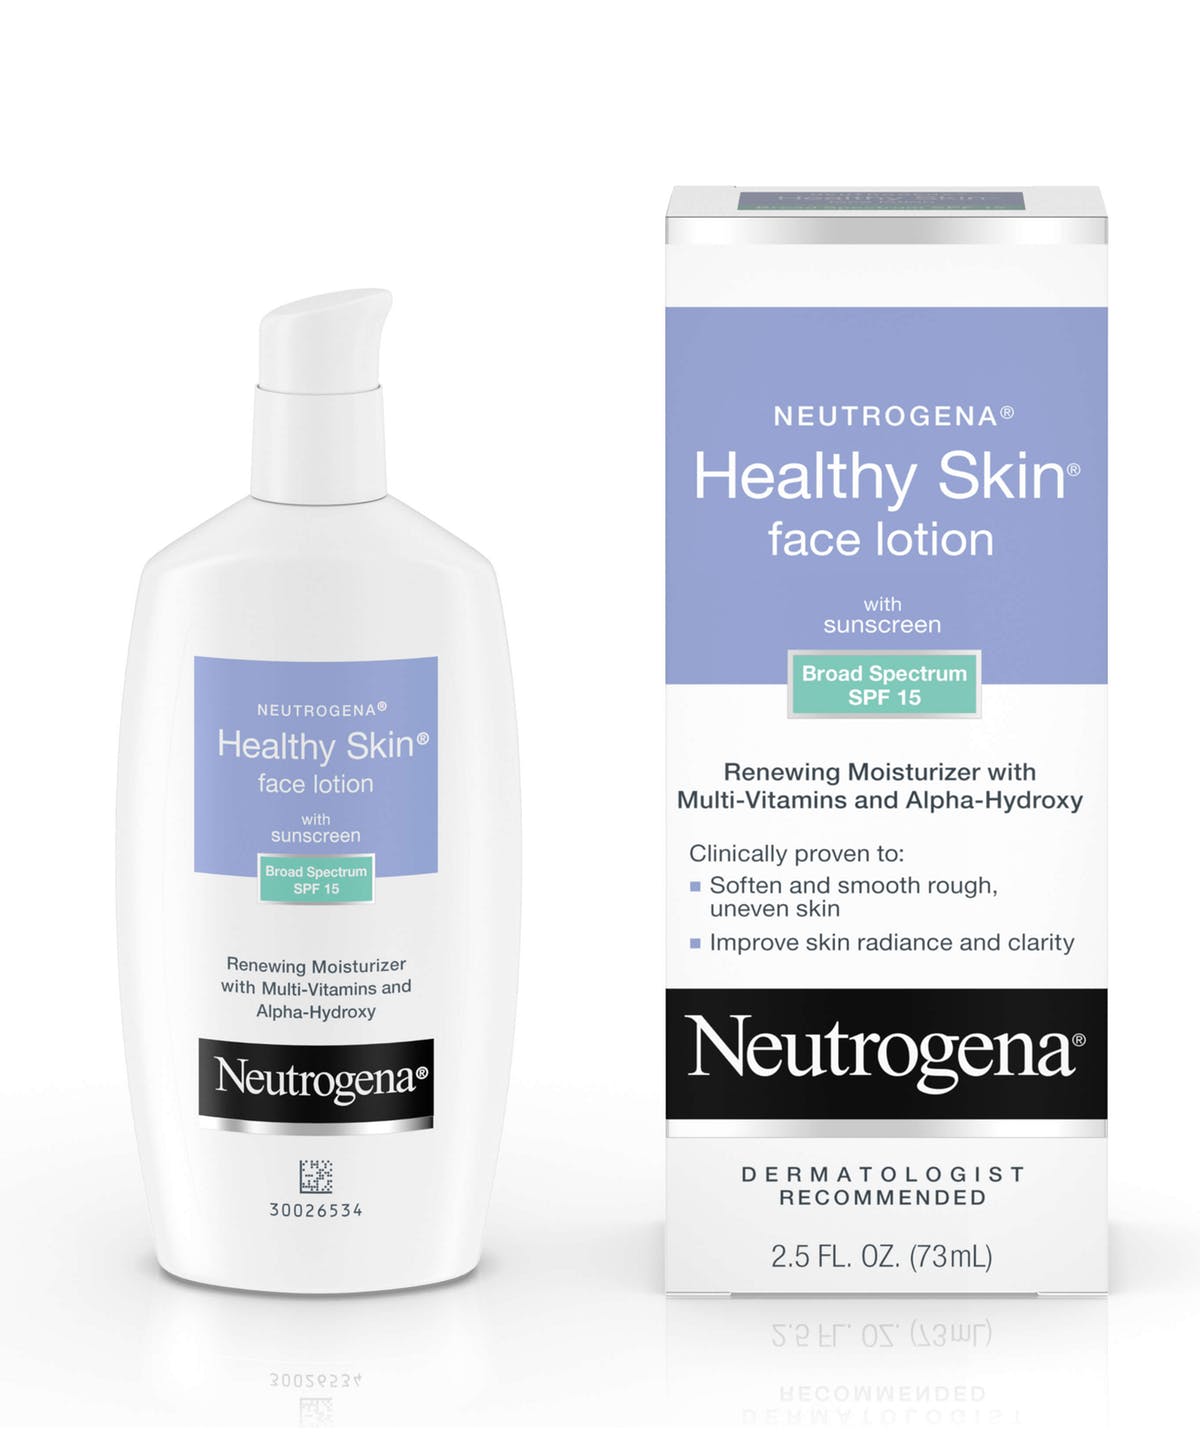 Neutrogena Healthy Skin Face Lotion with Sunscreen Broad Spectrum SPF 